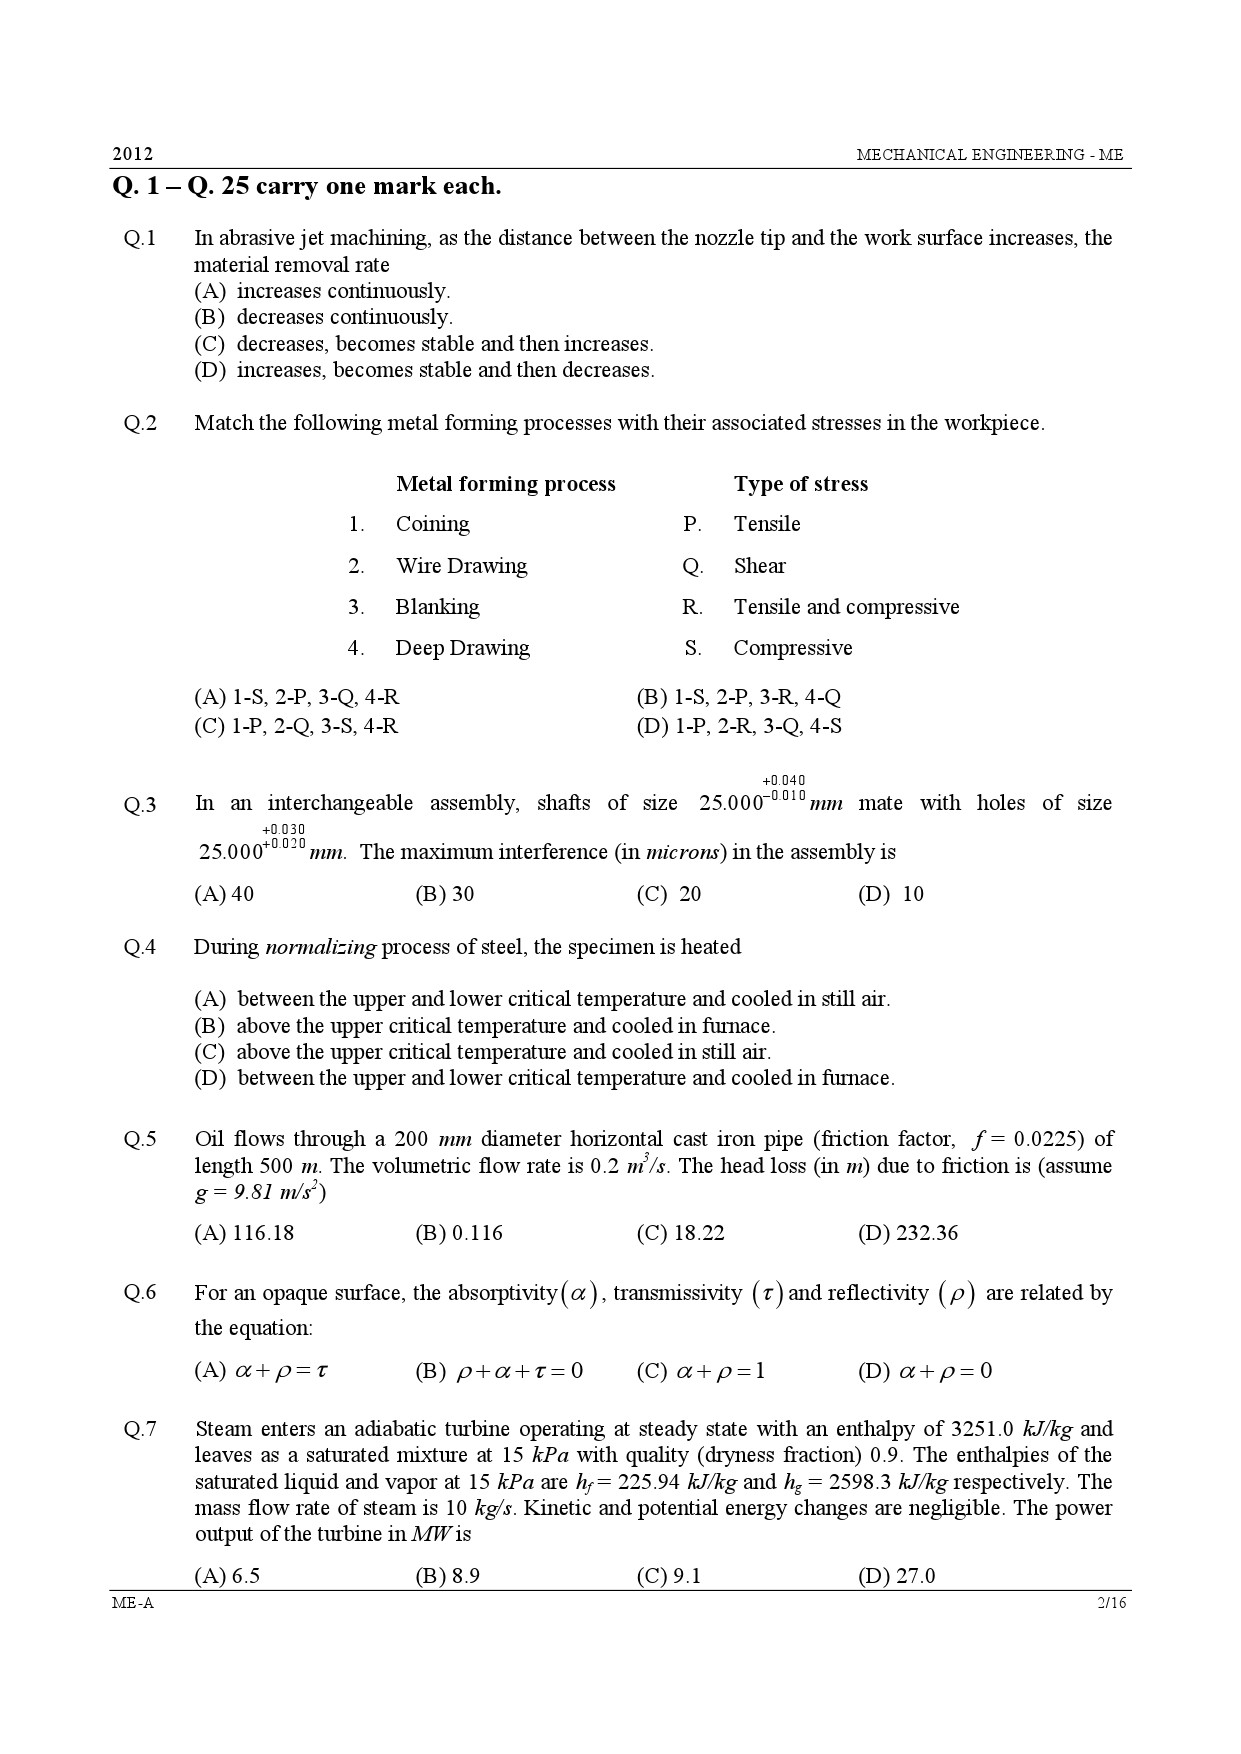 GATE Exam Question Paper 2012 Mechanical Engineering 2